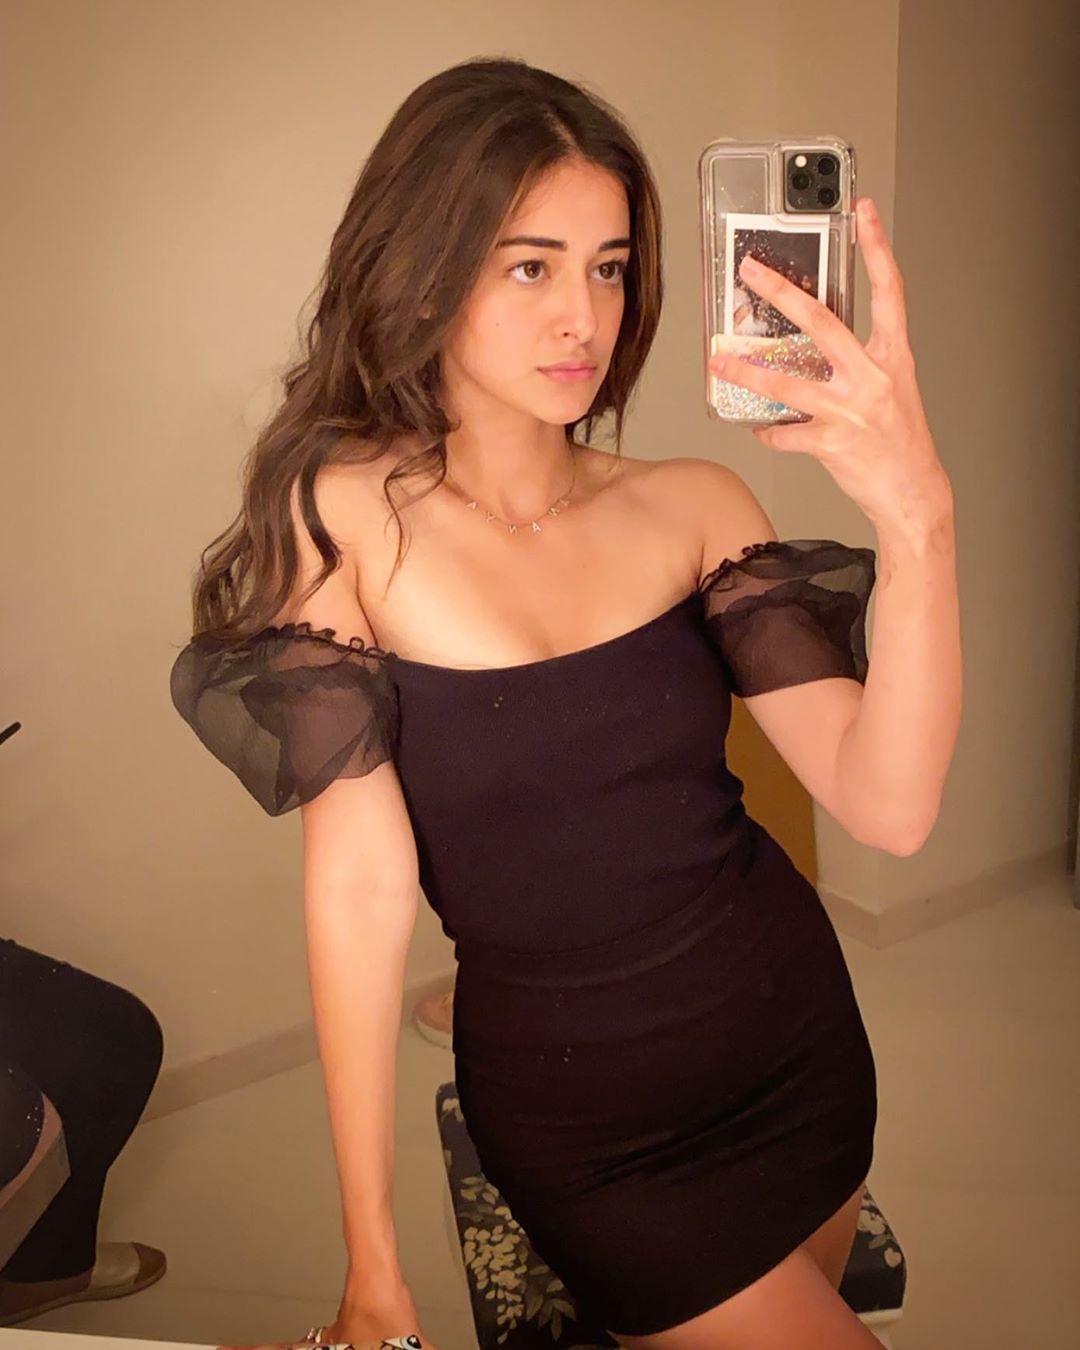 IN PICS: Ananya Panday's Hottest Looks In Bodycon Outfits 2